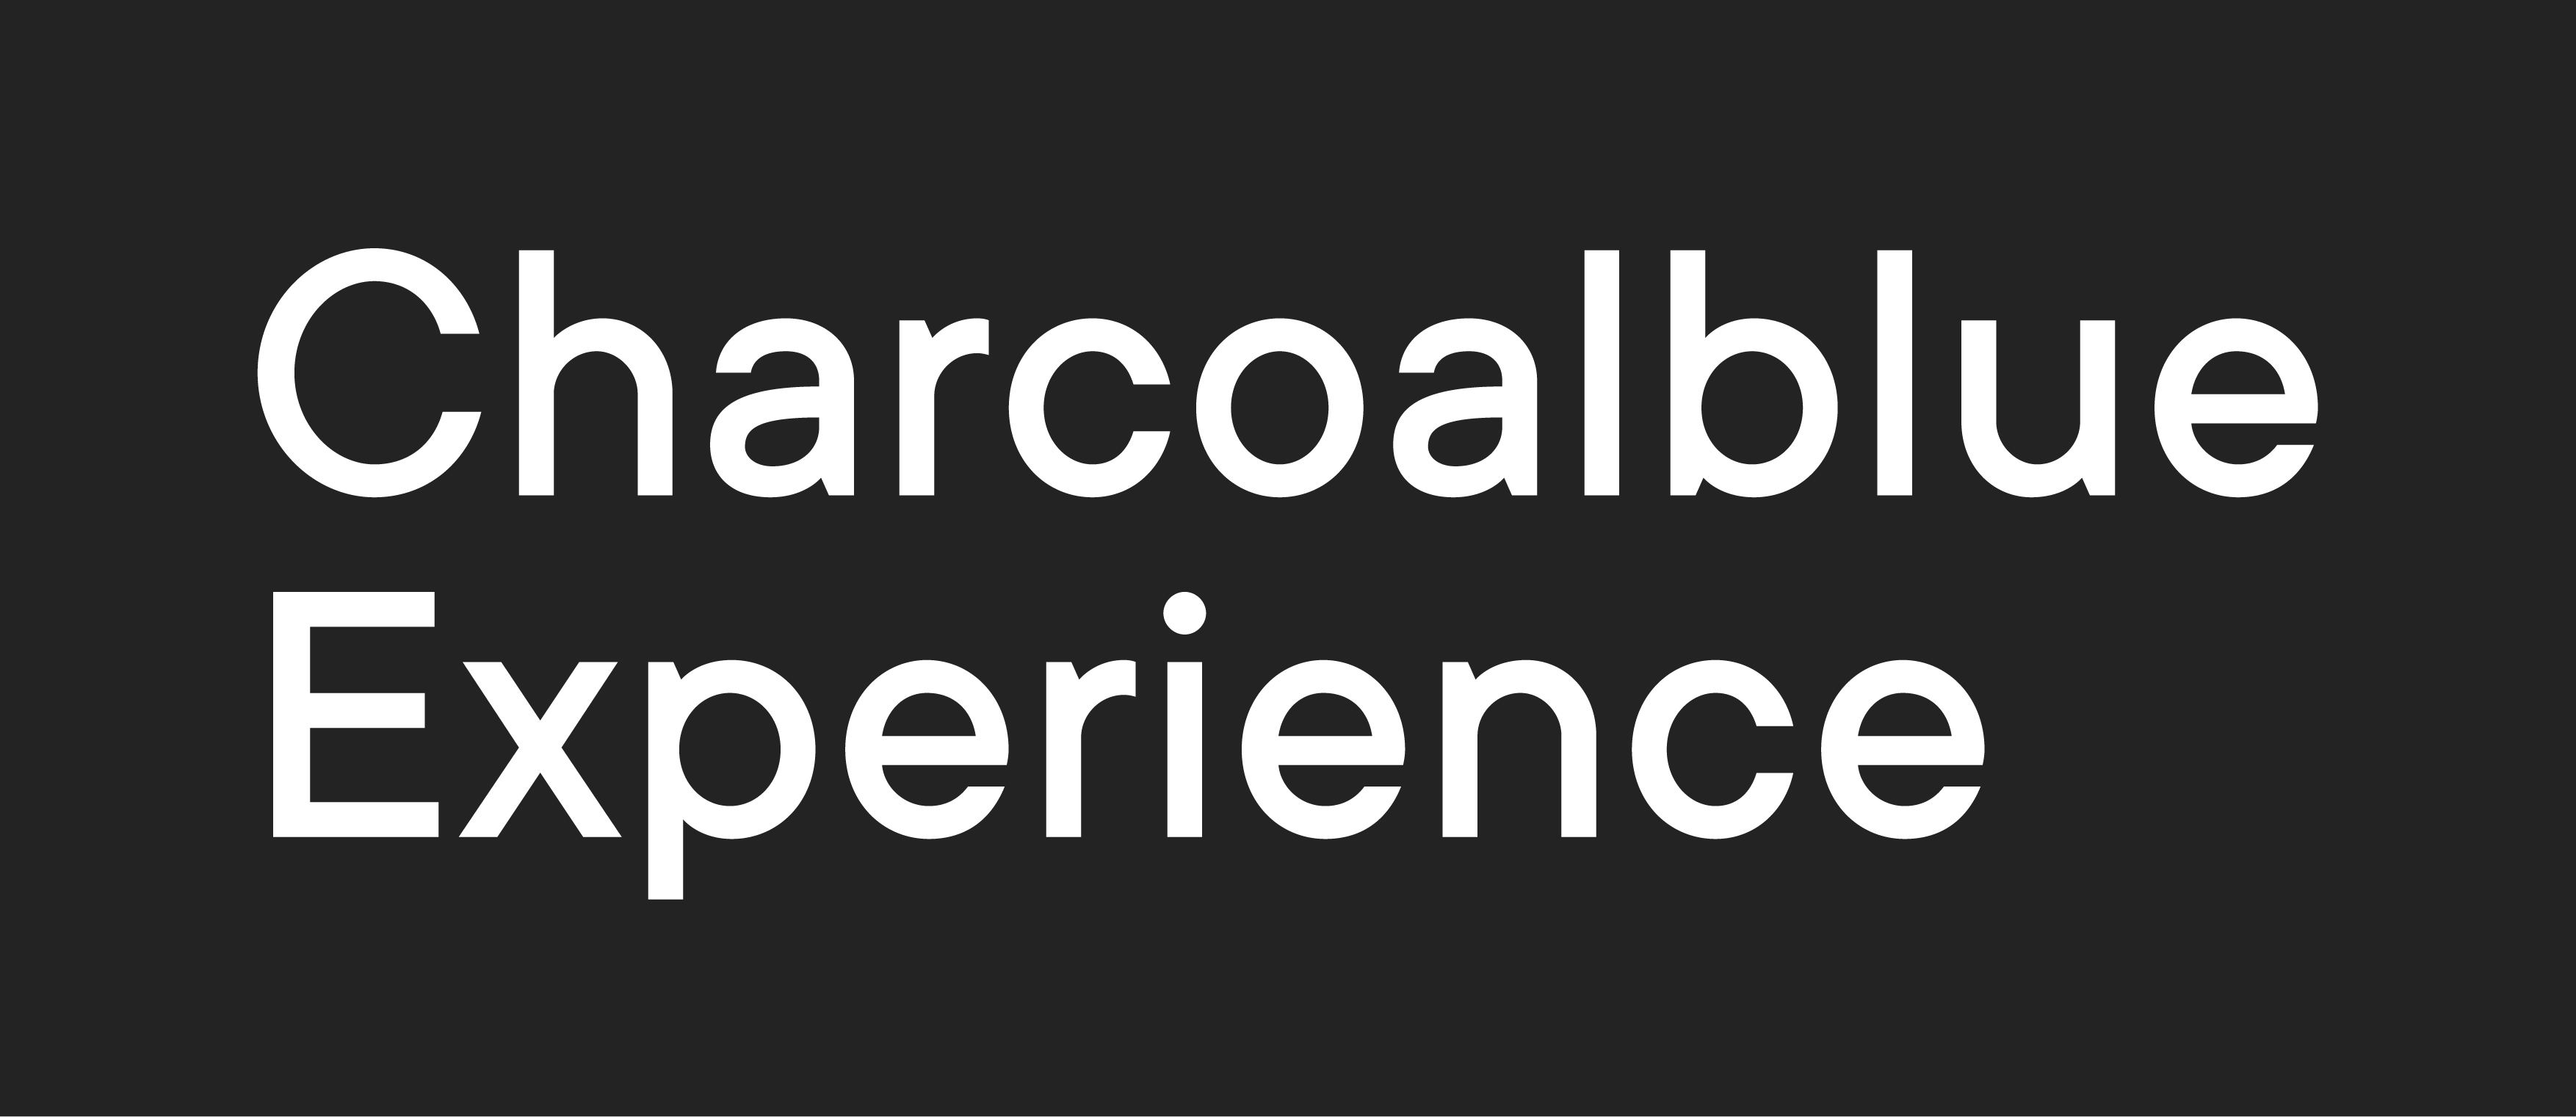 Charcoalblue Experience